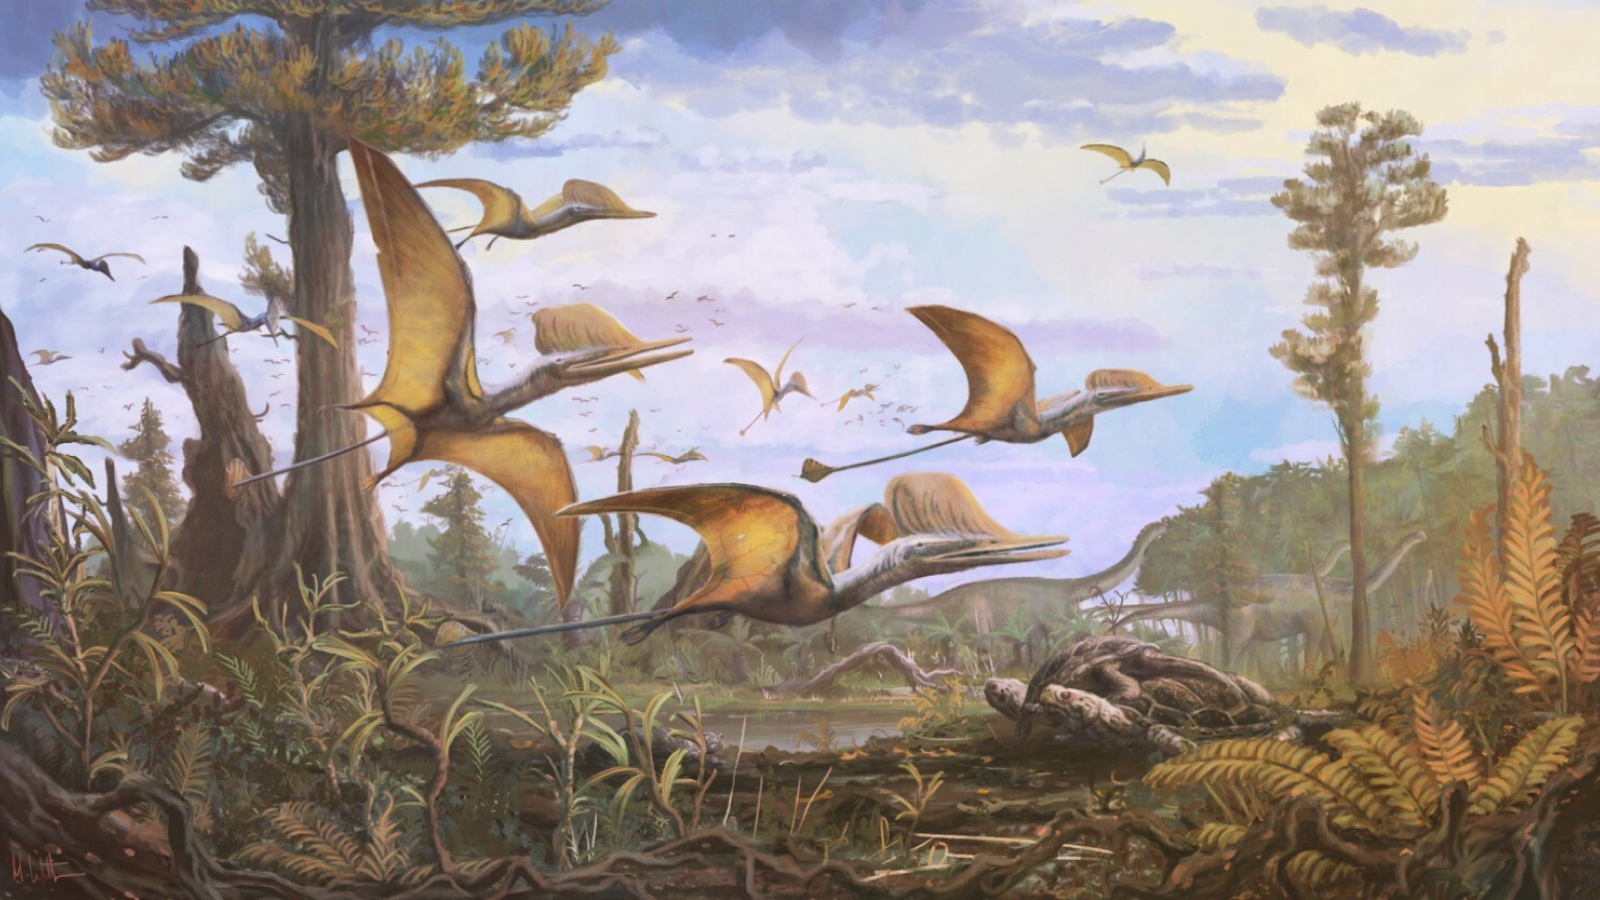 Jurassic 'mist wing' fossil discovered on Scottish island could be missing link in pterosaur evolution